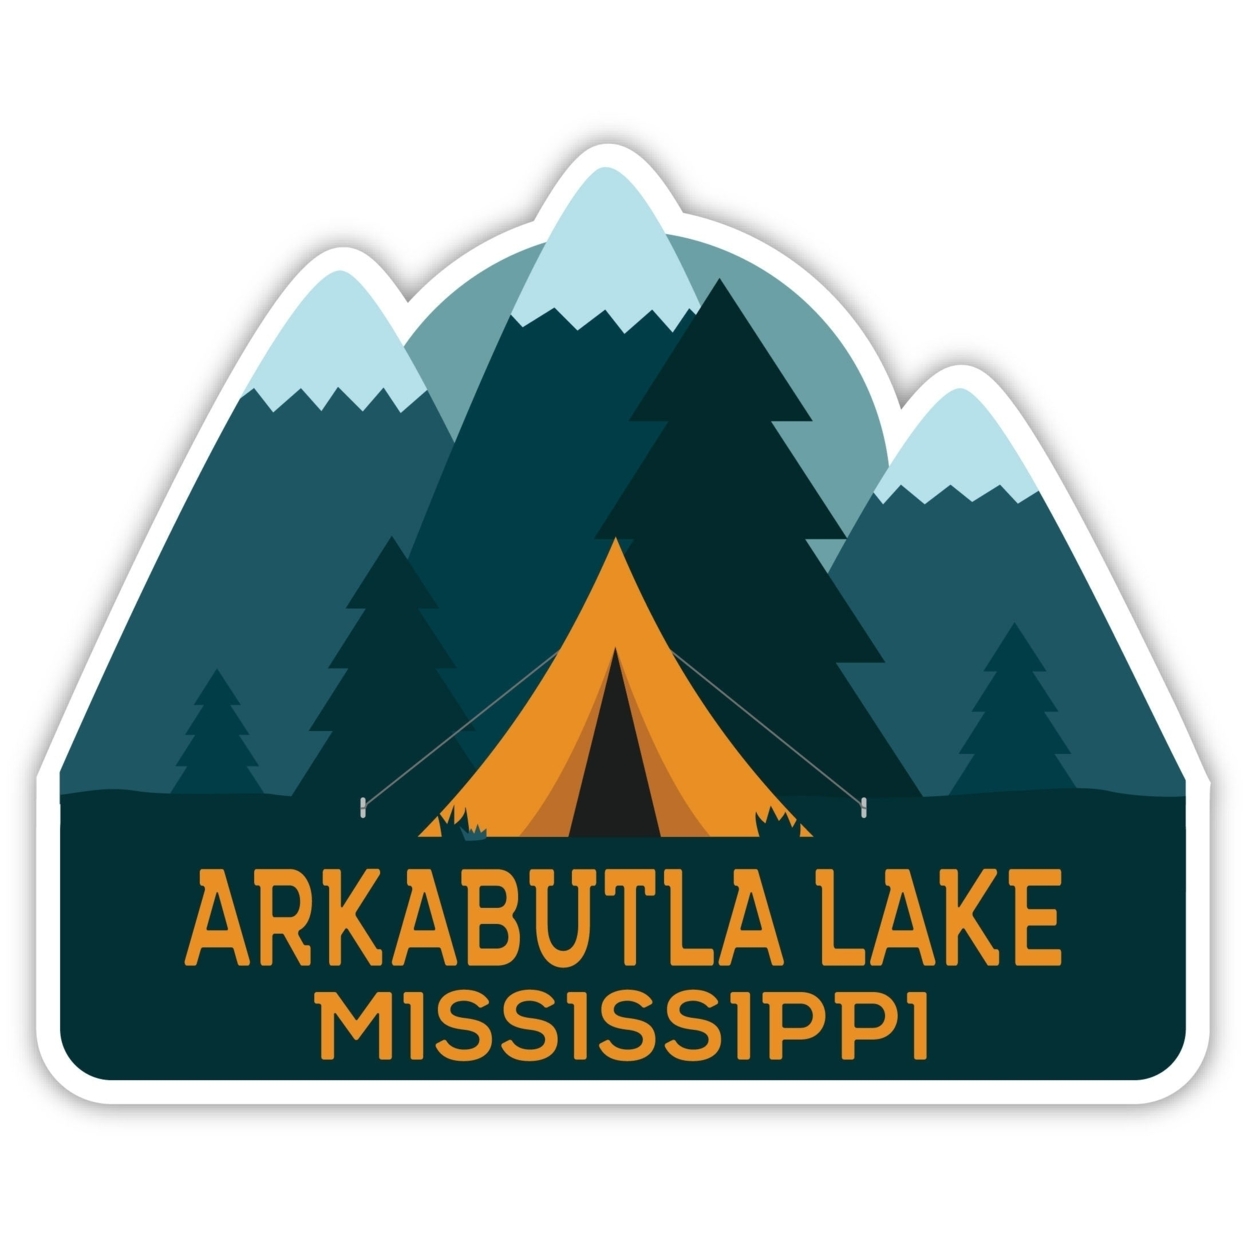 Arkabutla Lake Mississippi Souvenir Decorative Stickers (Choose Theme And Size) - 4-Pack, 4-Inch, Tent